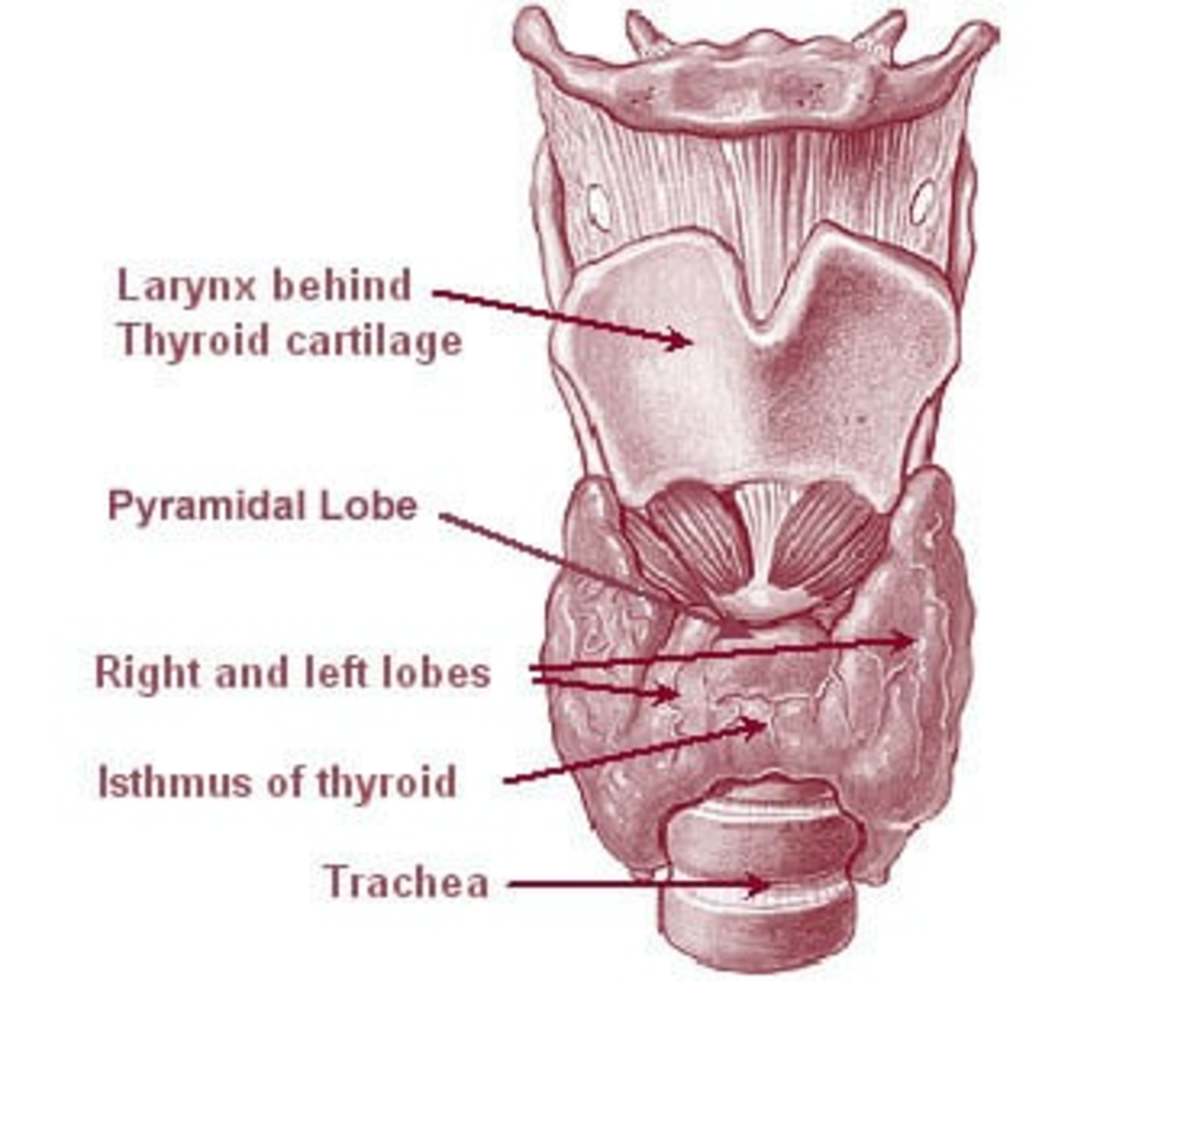 Certain conditions can lead to you developing thyroid diseases.